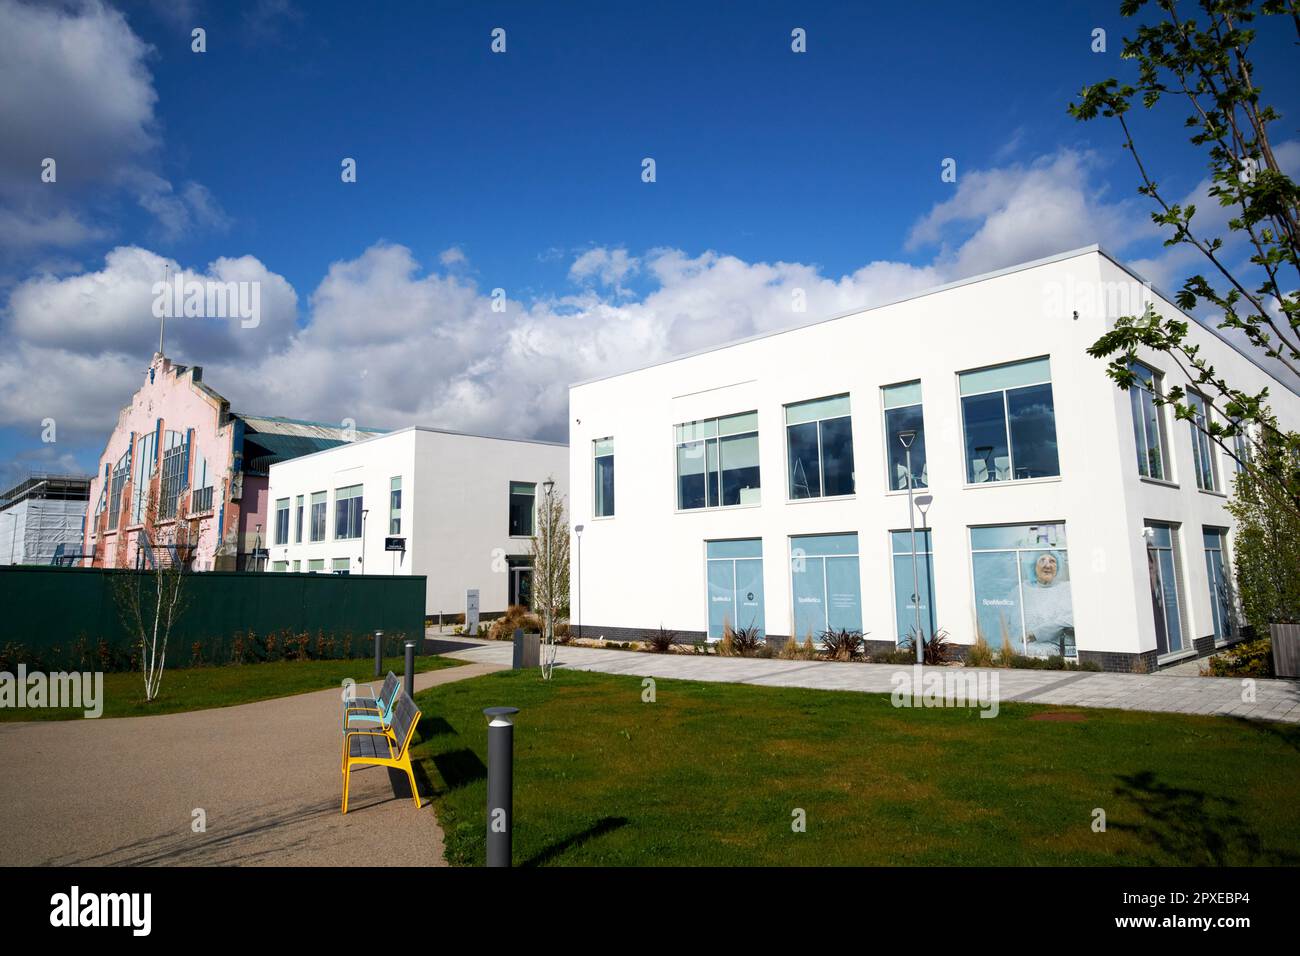 kings hall health and wellbeing park life sciences housing dataworks, diaceutics, spamedica and kingsbridge healthcare at balmoral south belfast north Stock Photo